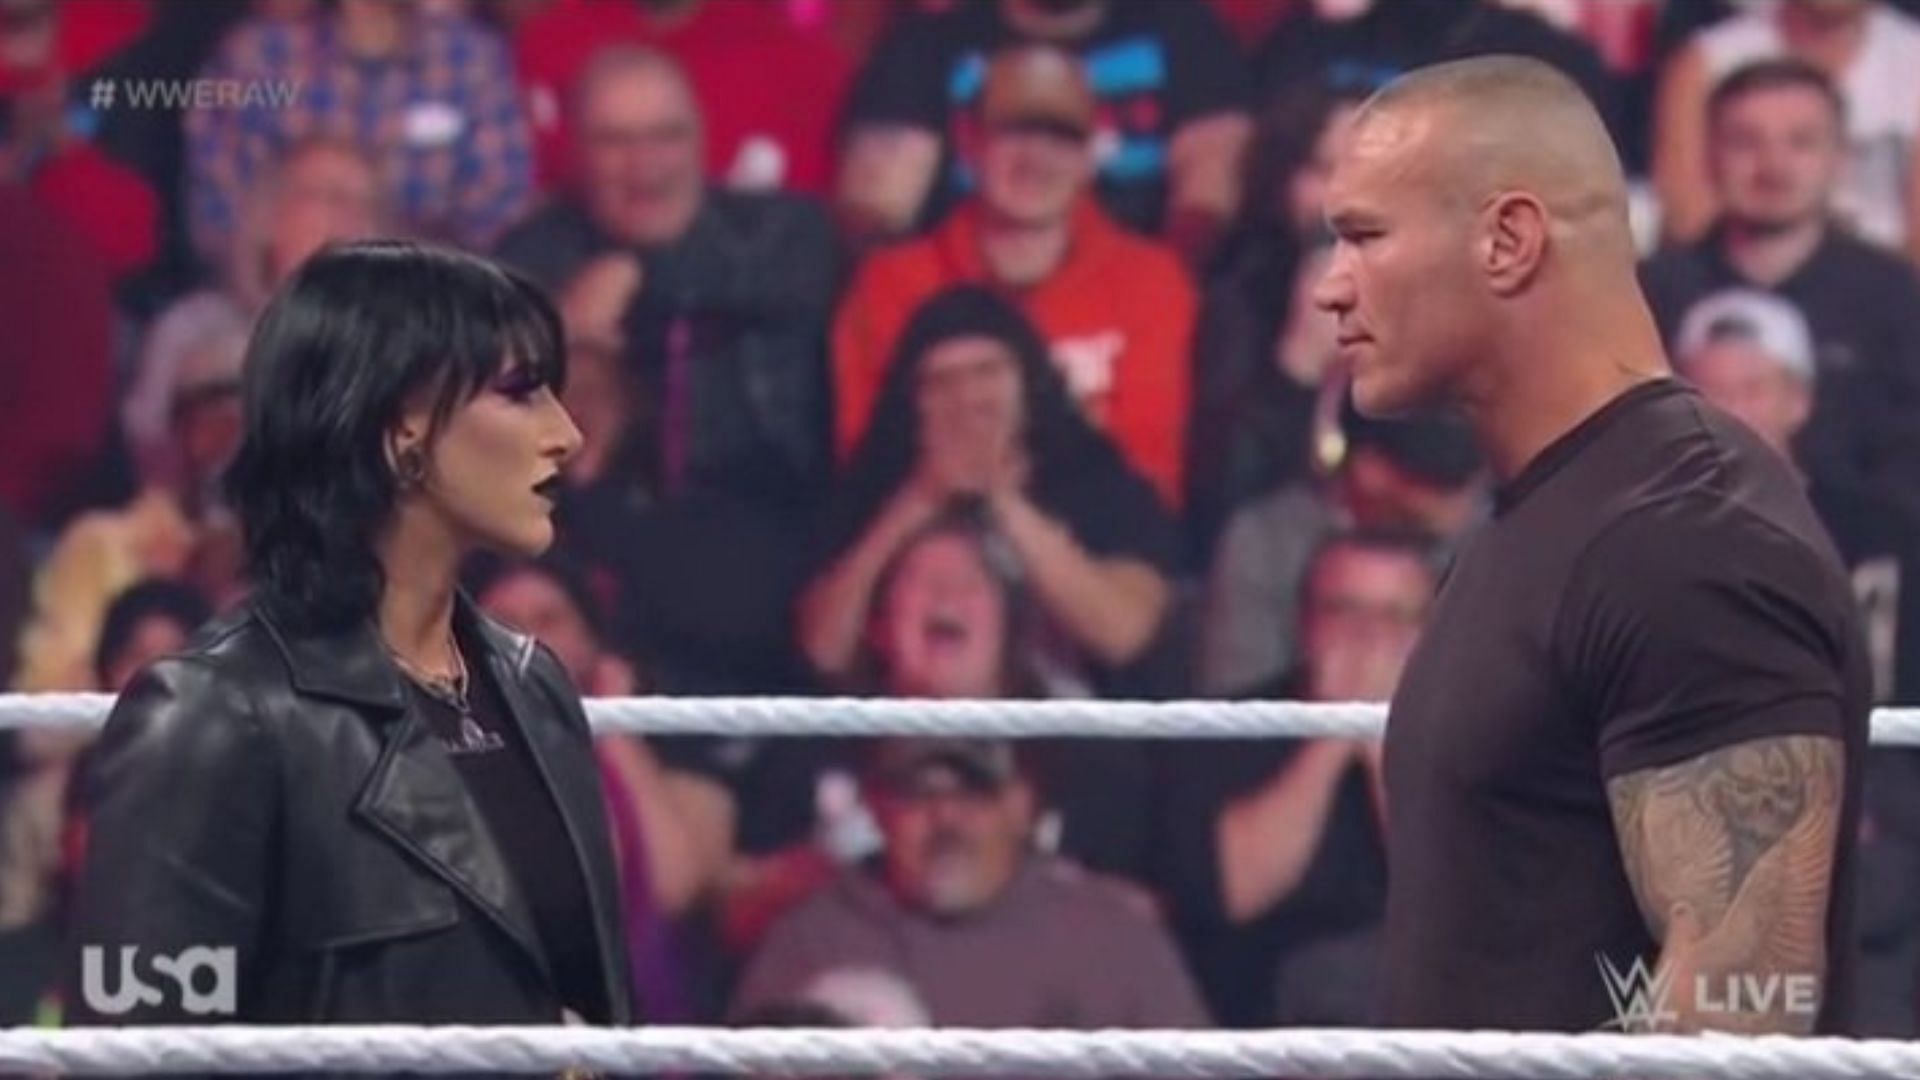 Rhea Ripley and Randy Orton came face-to-face on RAW